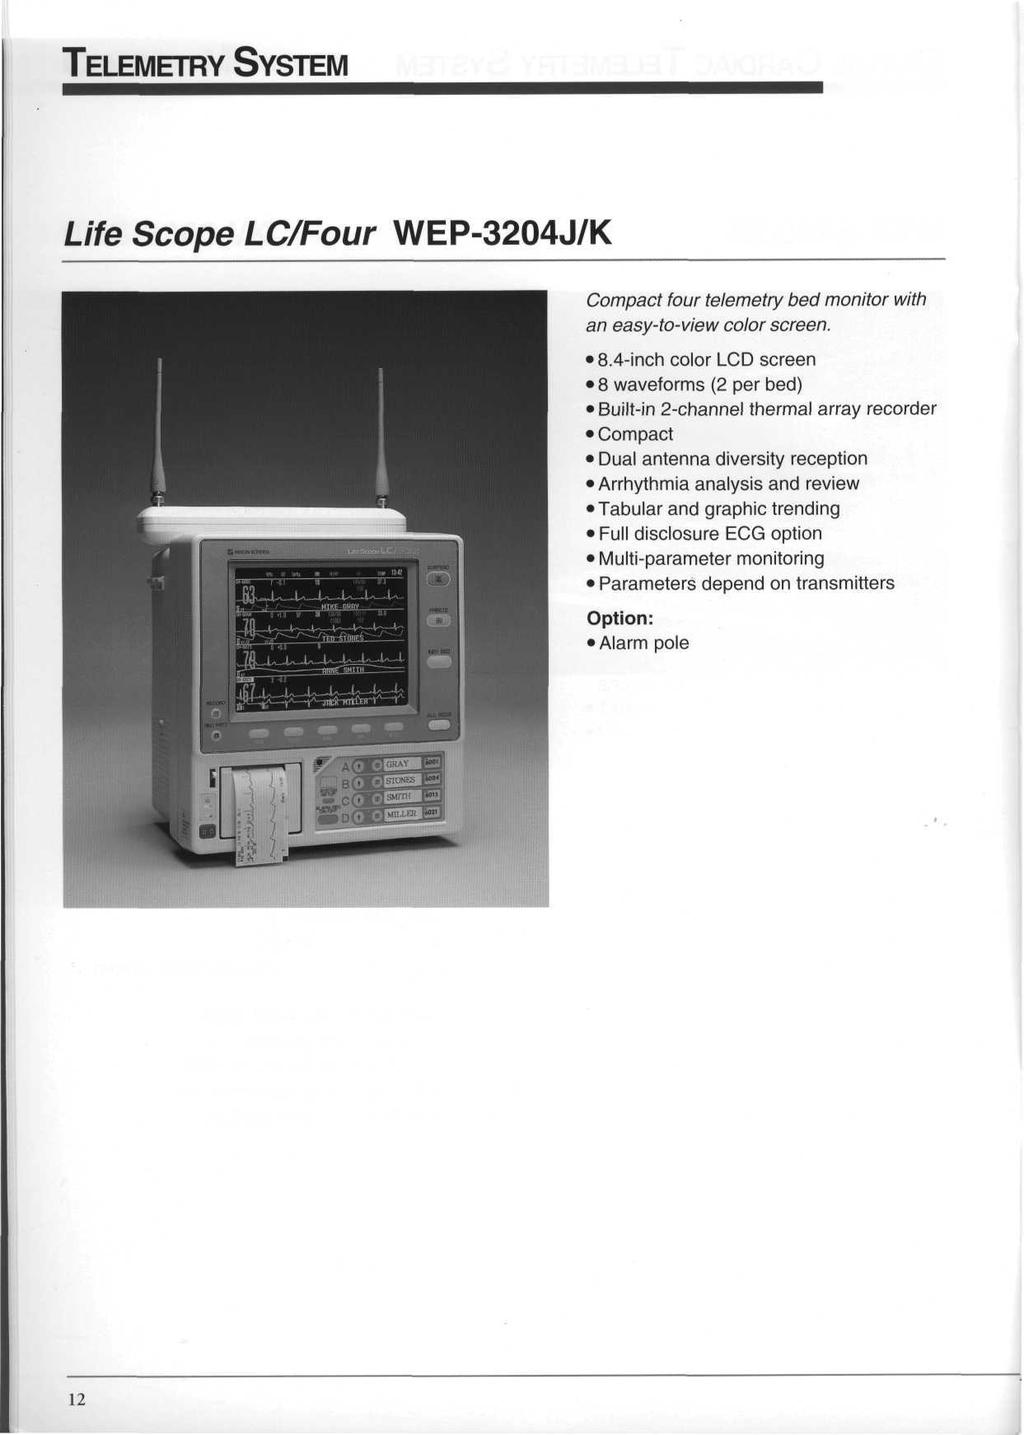 TELEMETRY SYSTEM Life Scope LCFour WEP-3204JK Compact four telemetry bed monitor with an easy-to-view color screen. 8.